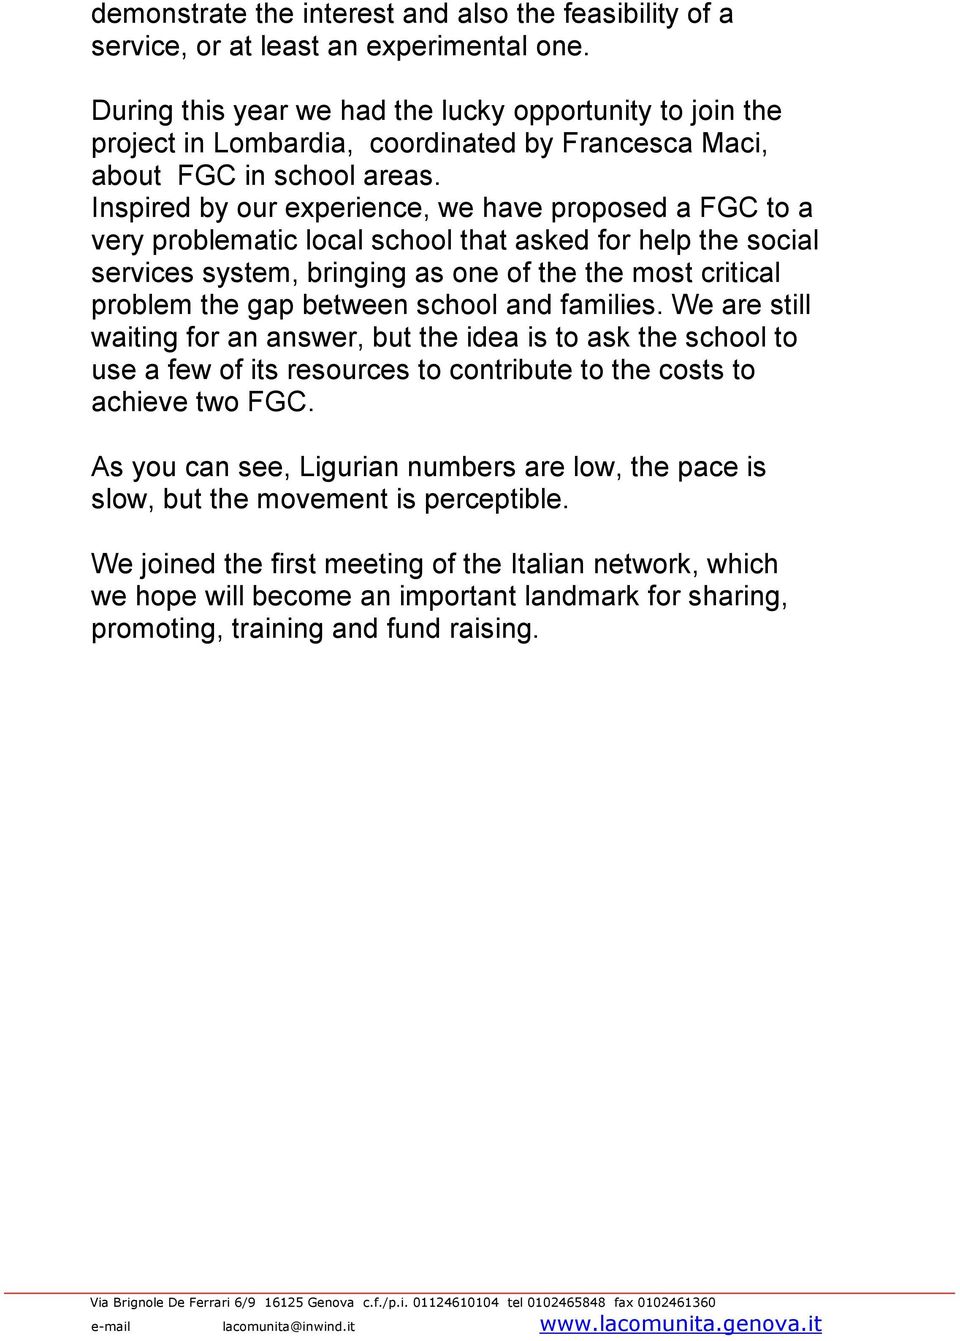 Inspired by our experience, we have proposed a FGC to a very problematic local school that asked for help the social services system, bringing as one of the the most critical problem the gap between